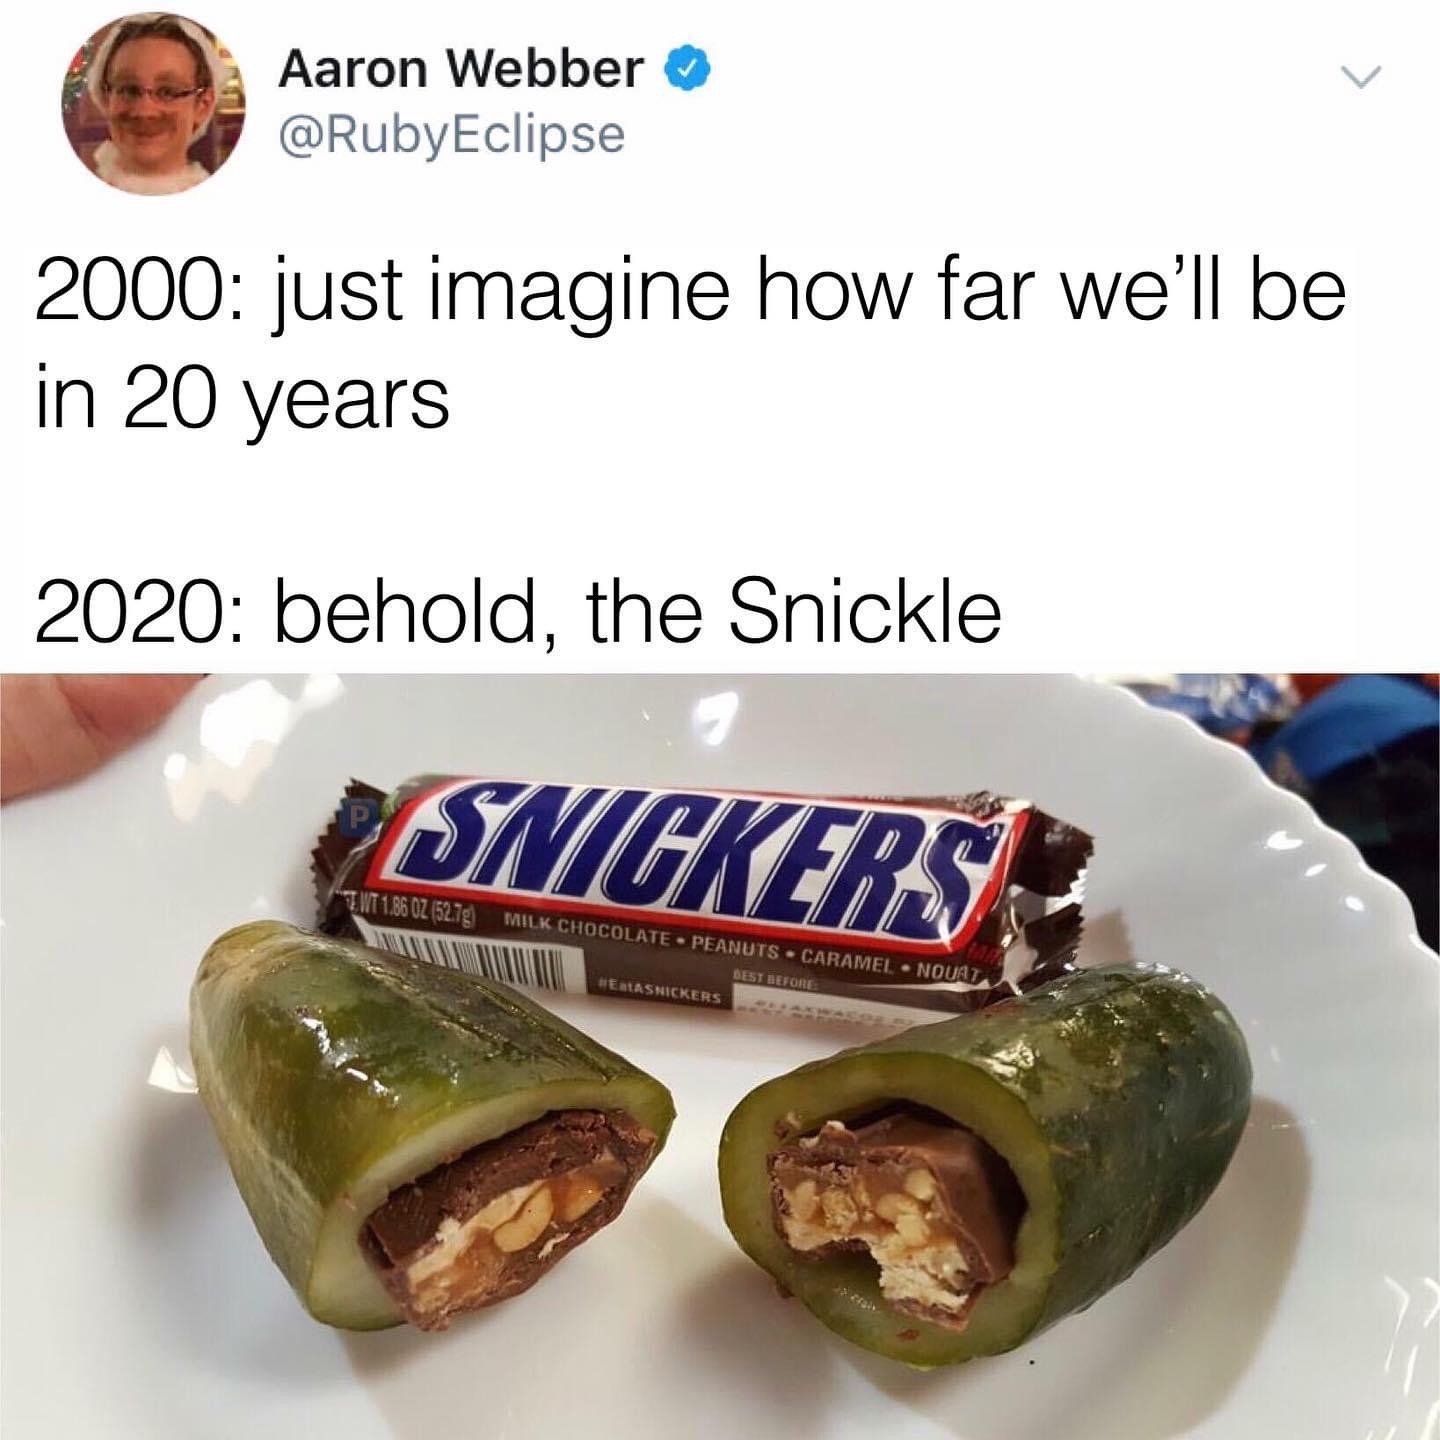 snickle meme - Aaron Webber 2000 just imagine how far we'll be in 20 years 2020 behold, the Snickle Snickers "Imt 1.86 Oz 5279 Milk Chocolate Peanuts Caramel Nouat Best Before Estasnickers